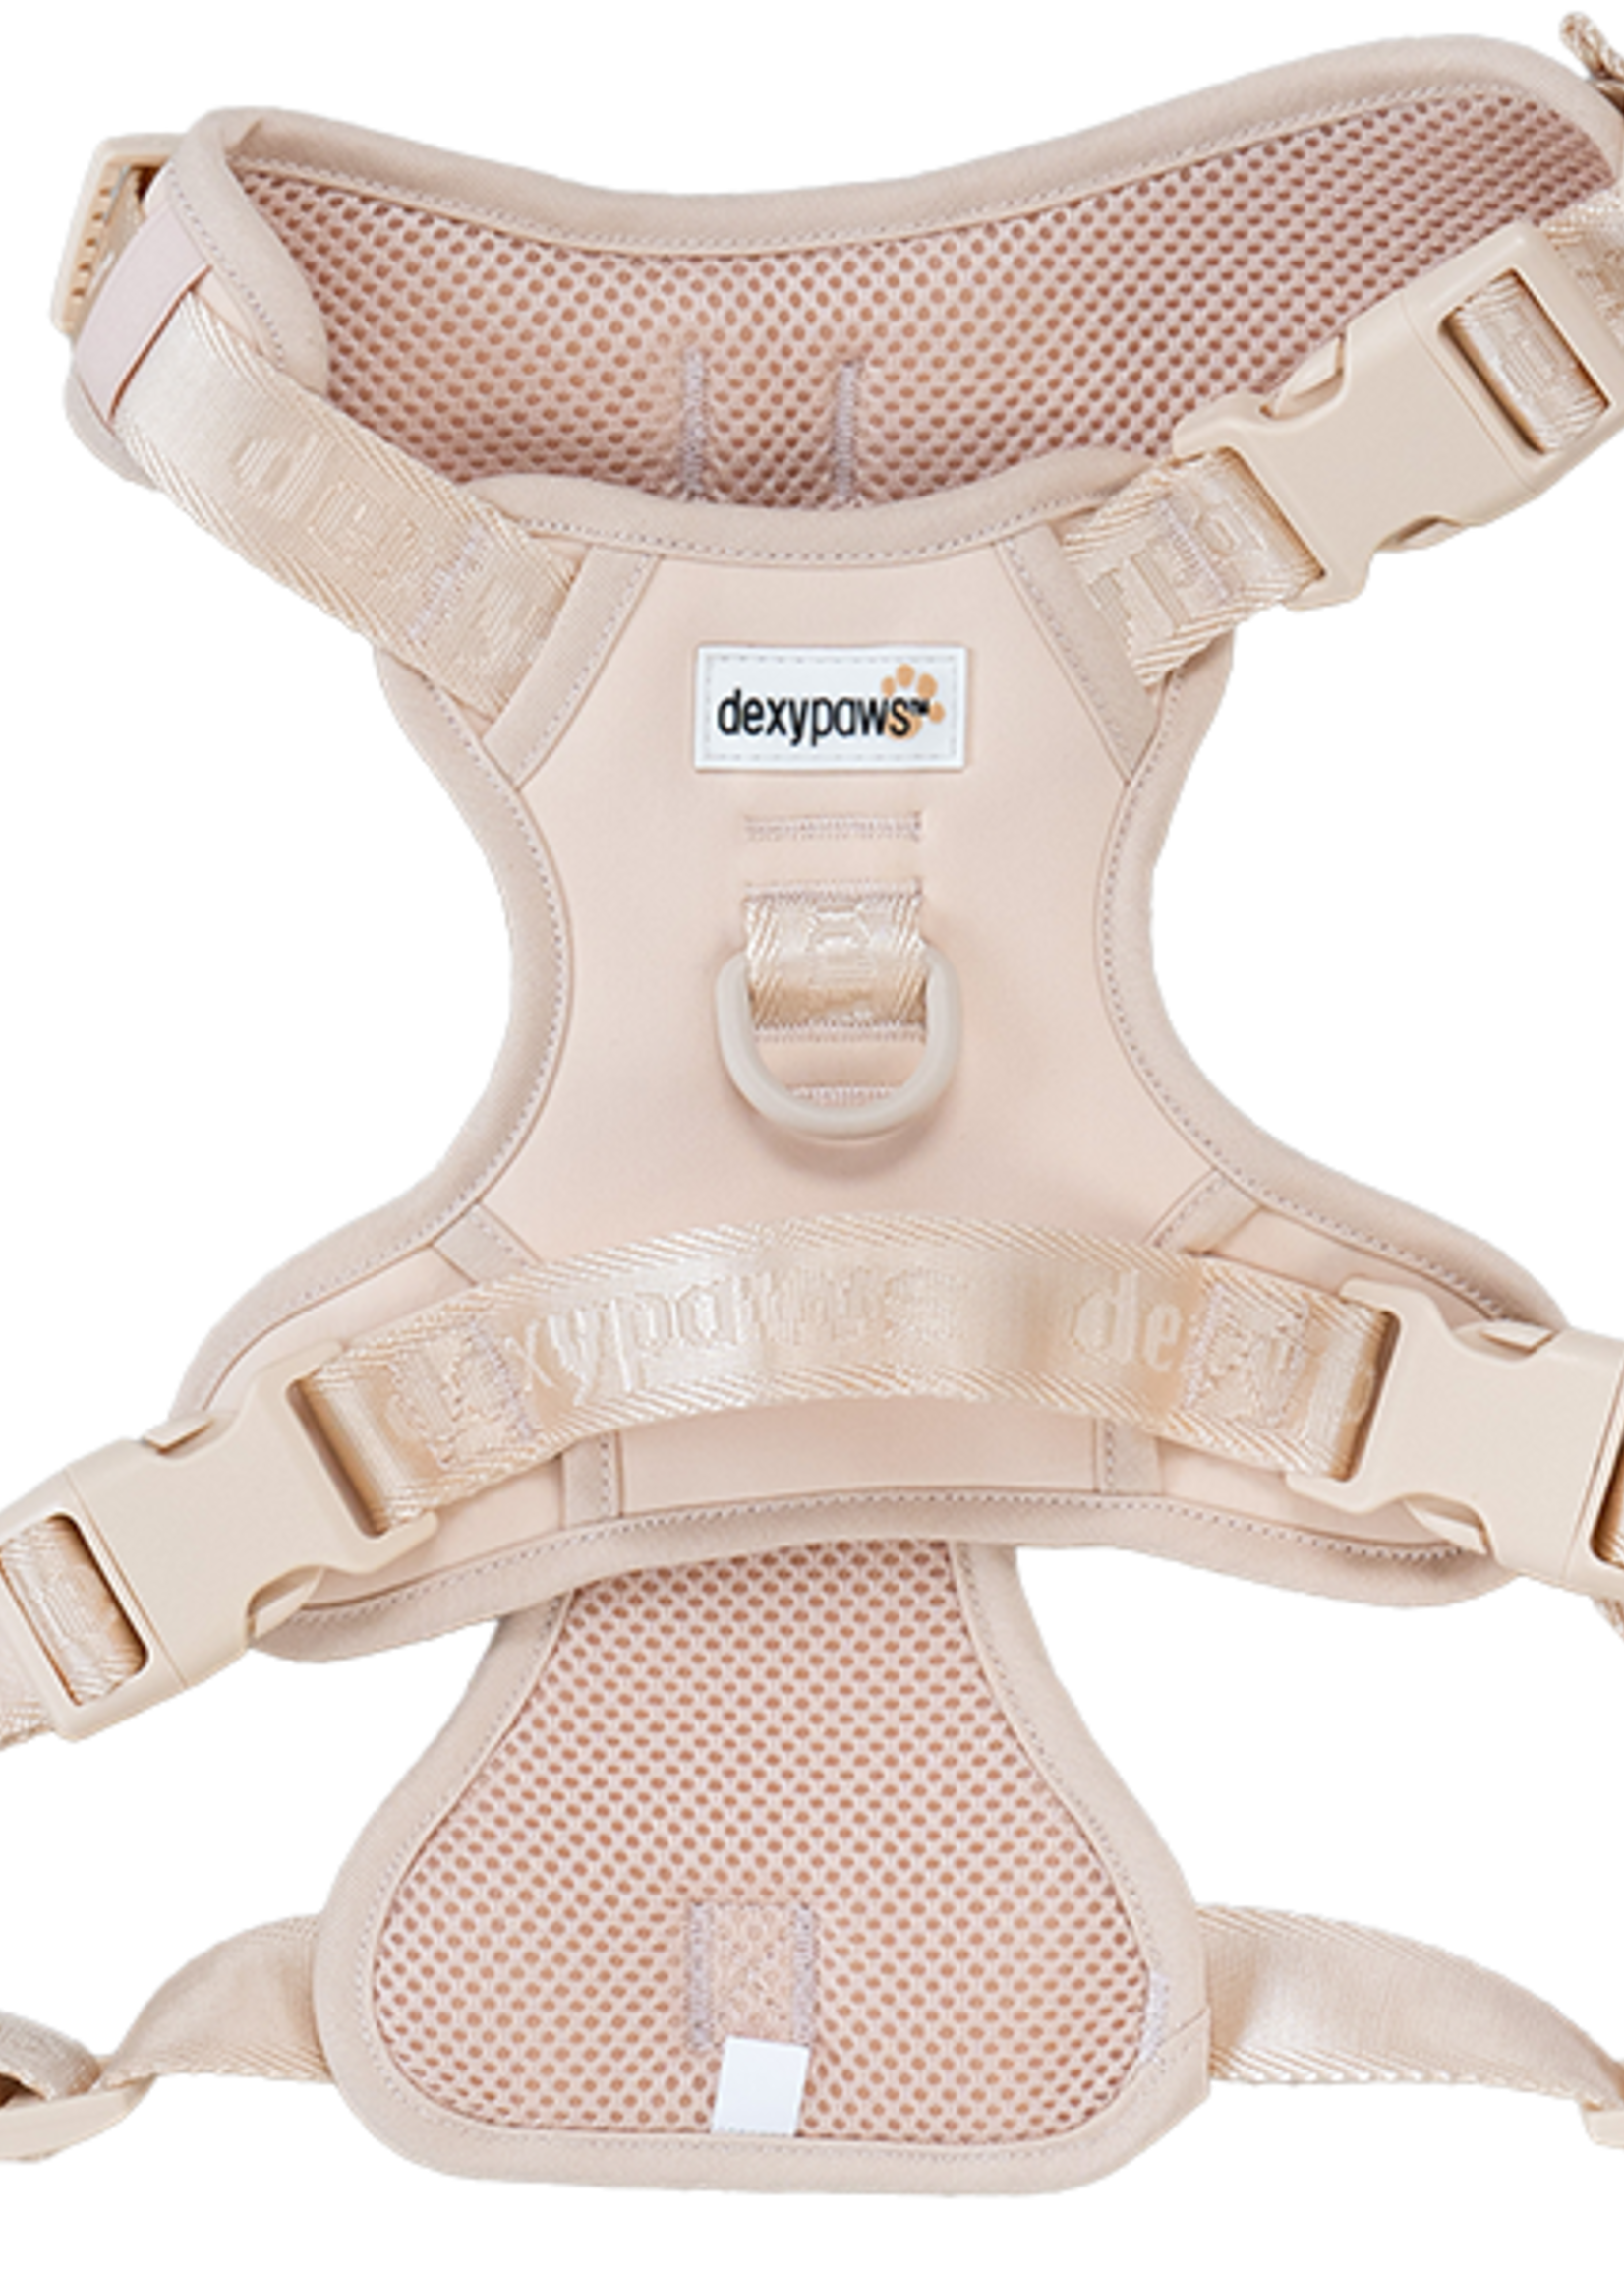 DexyPaws No-Pull Dog Harness - Nude - M